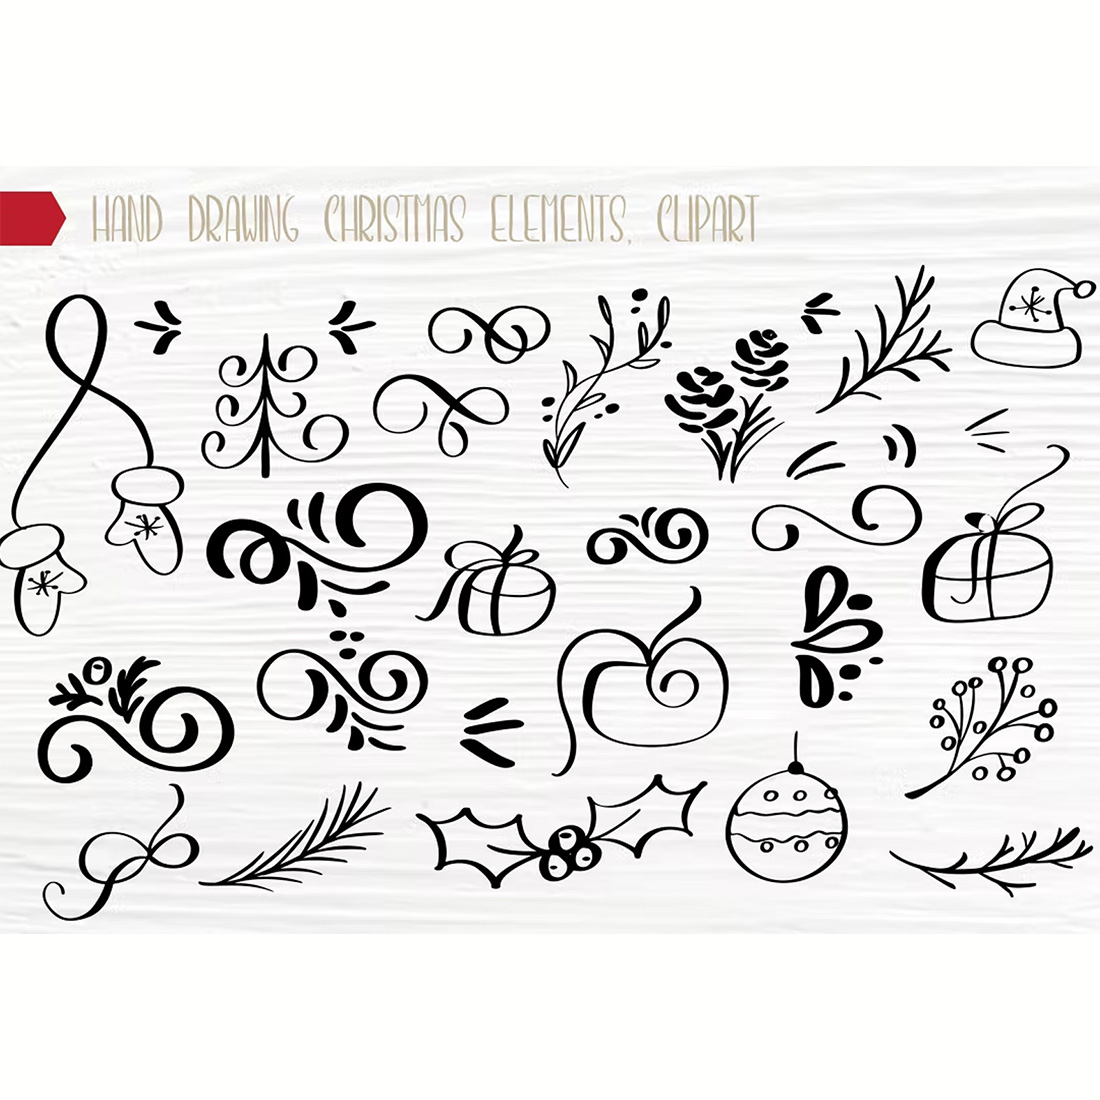 Christmas Ornaments Clipart Collections Bundle cover image.